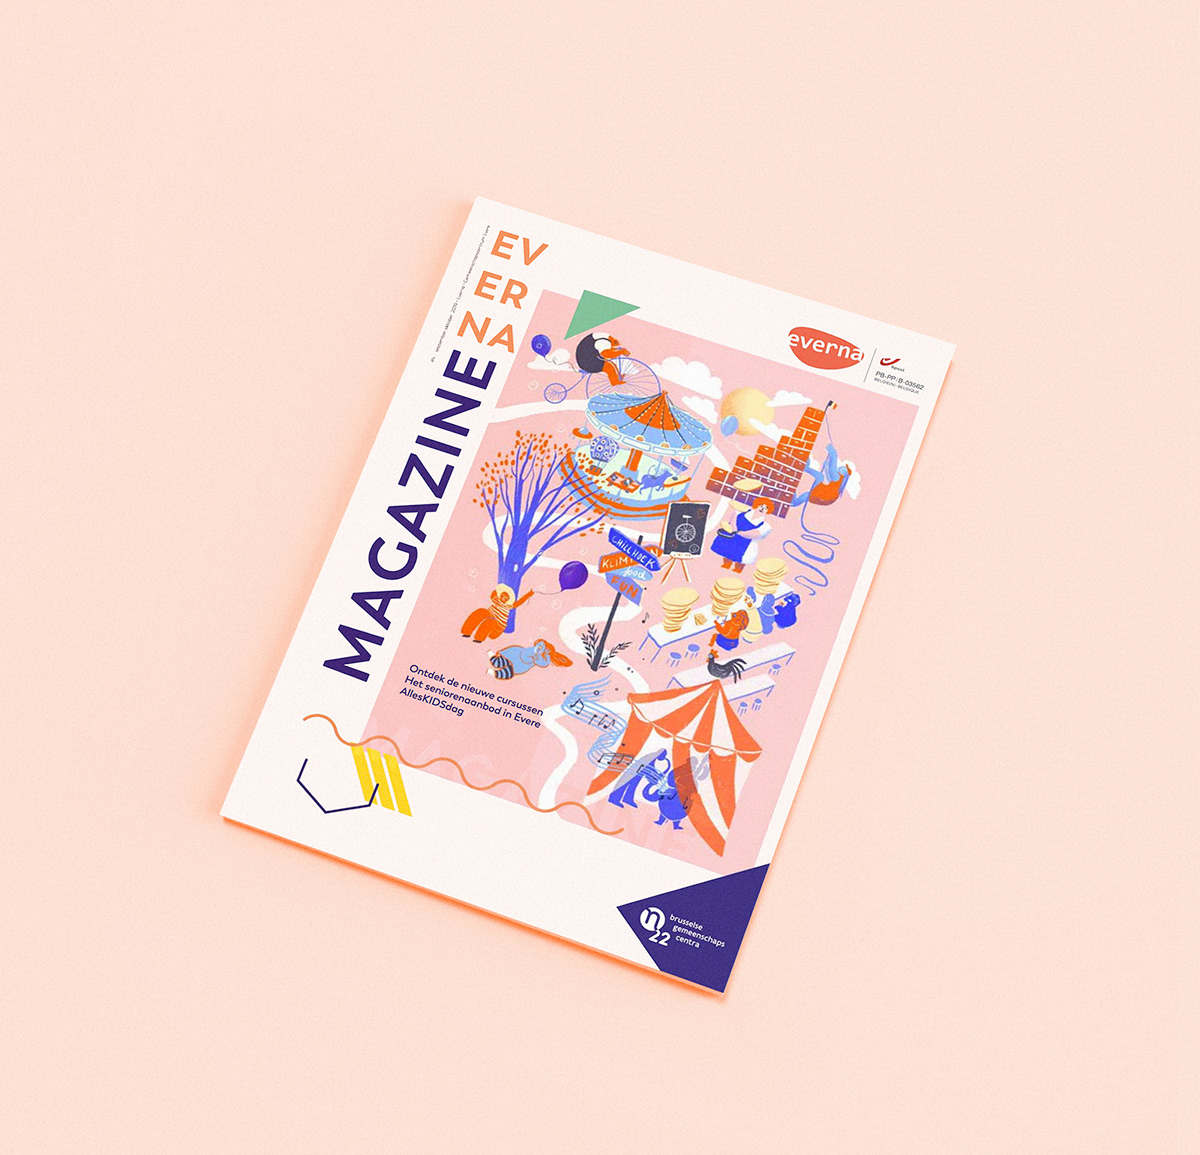 magazine issue culturalcenter communityarts happy colorful cover coverdesign culture brussels